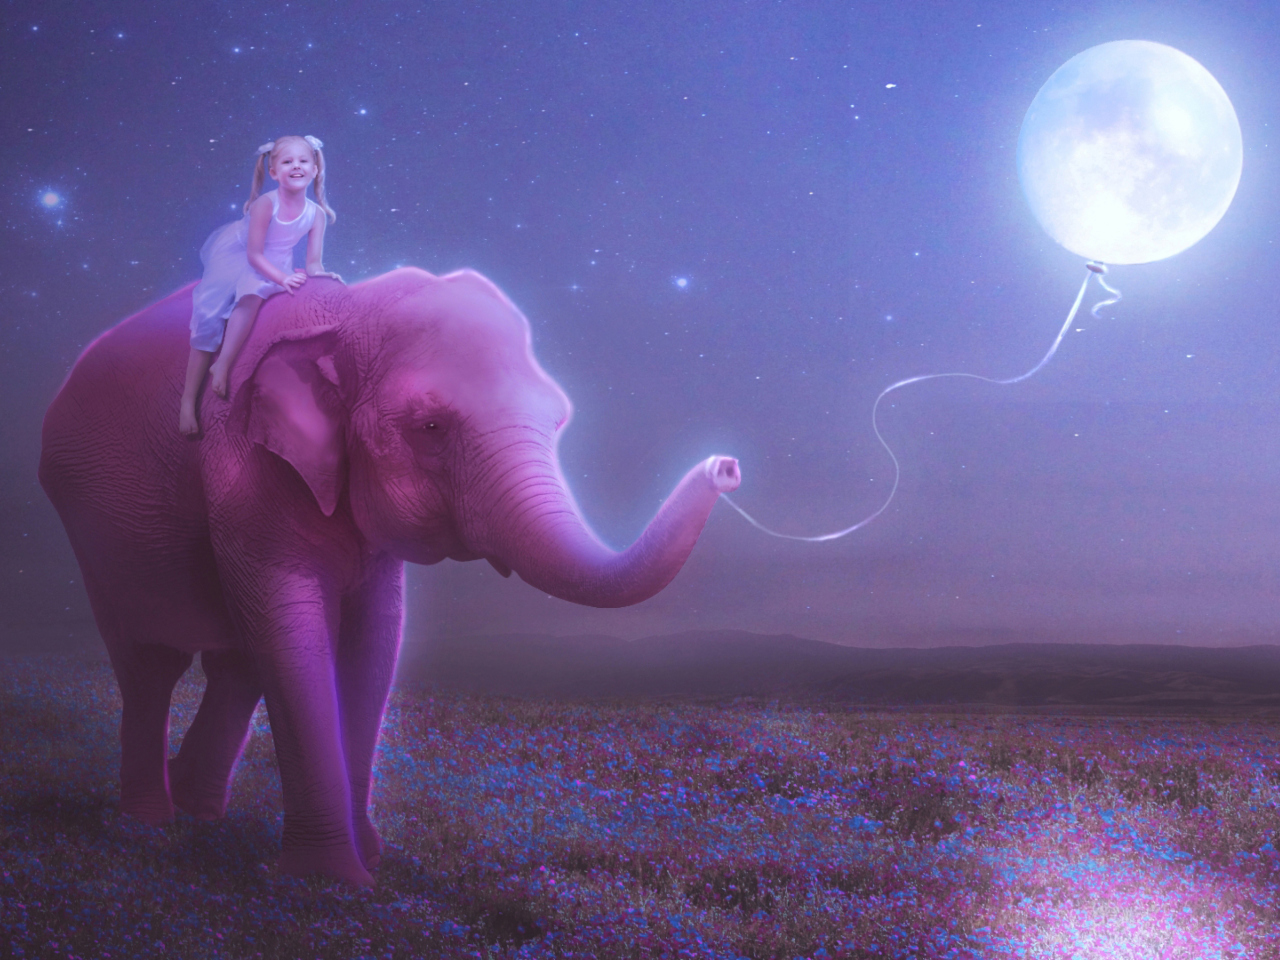 Child And Elephant wallpaper 1280x960